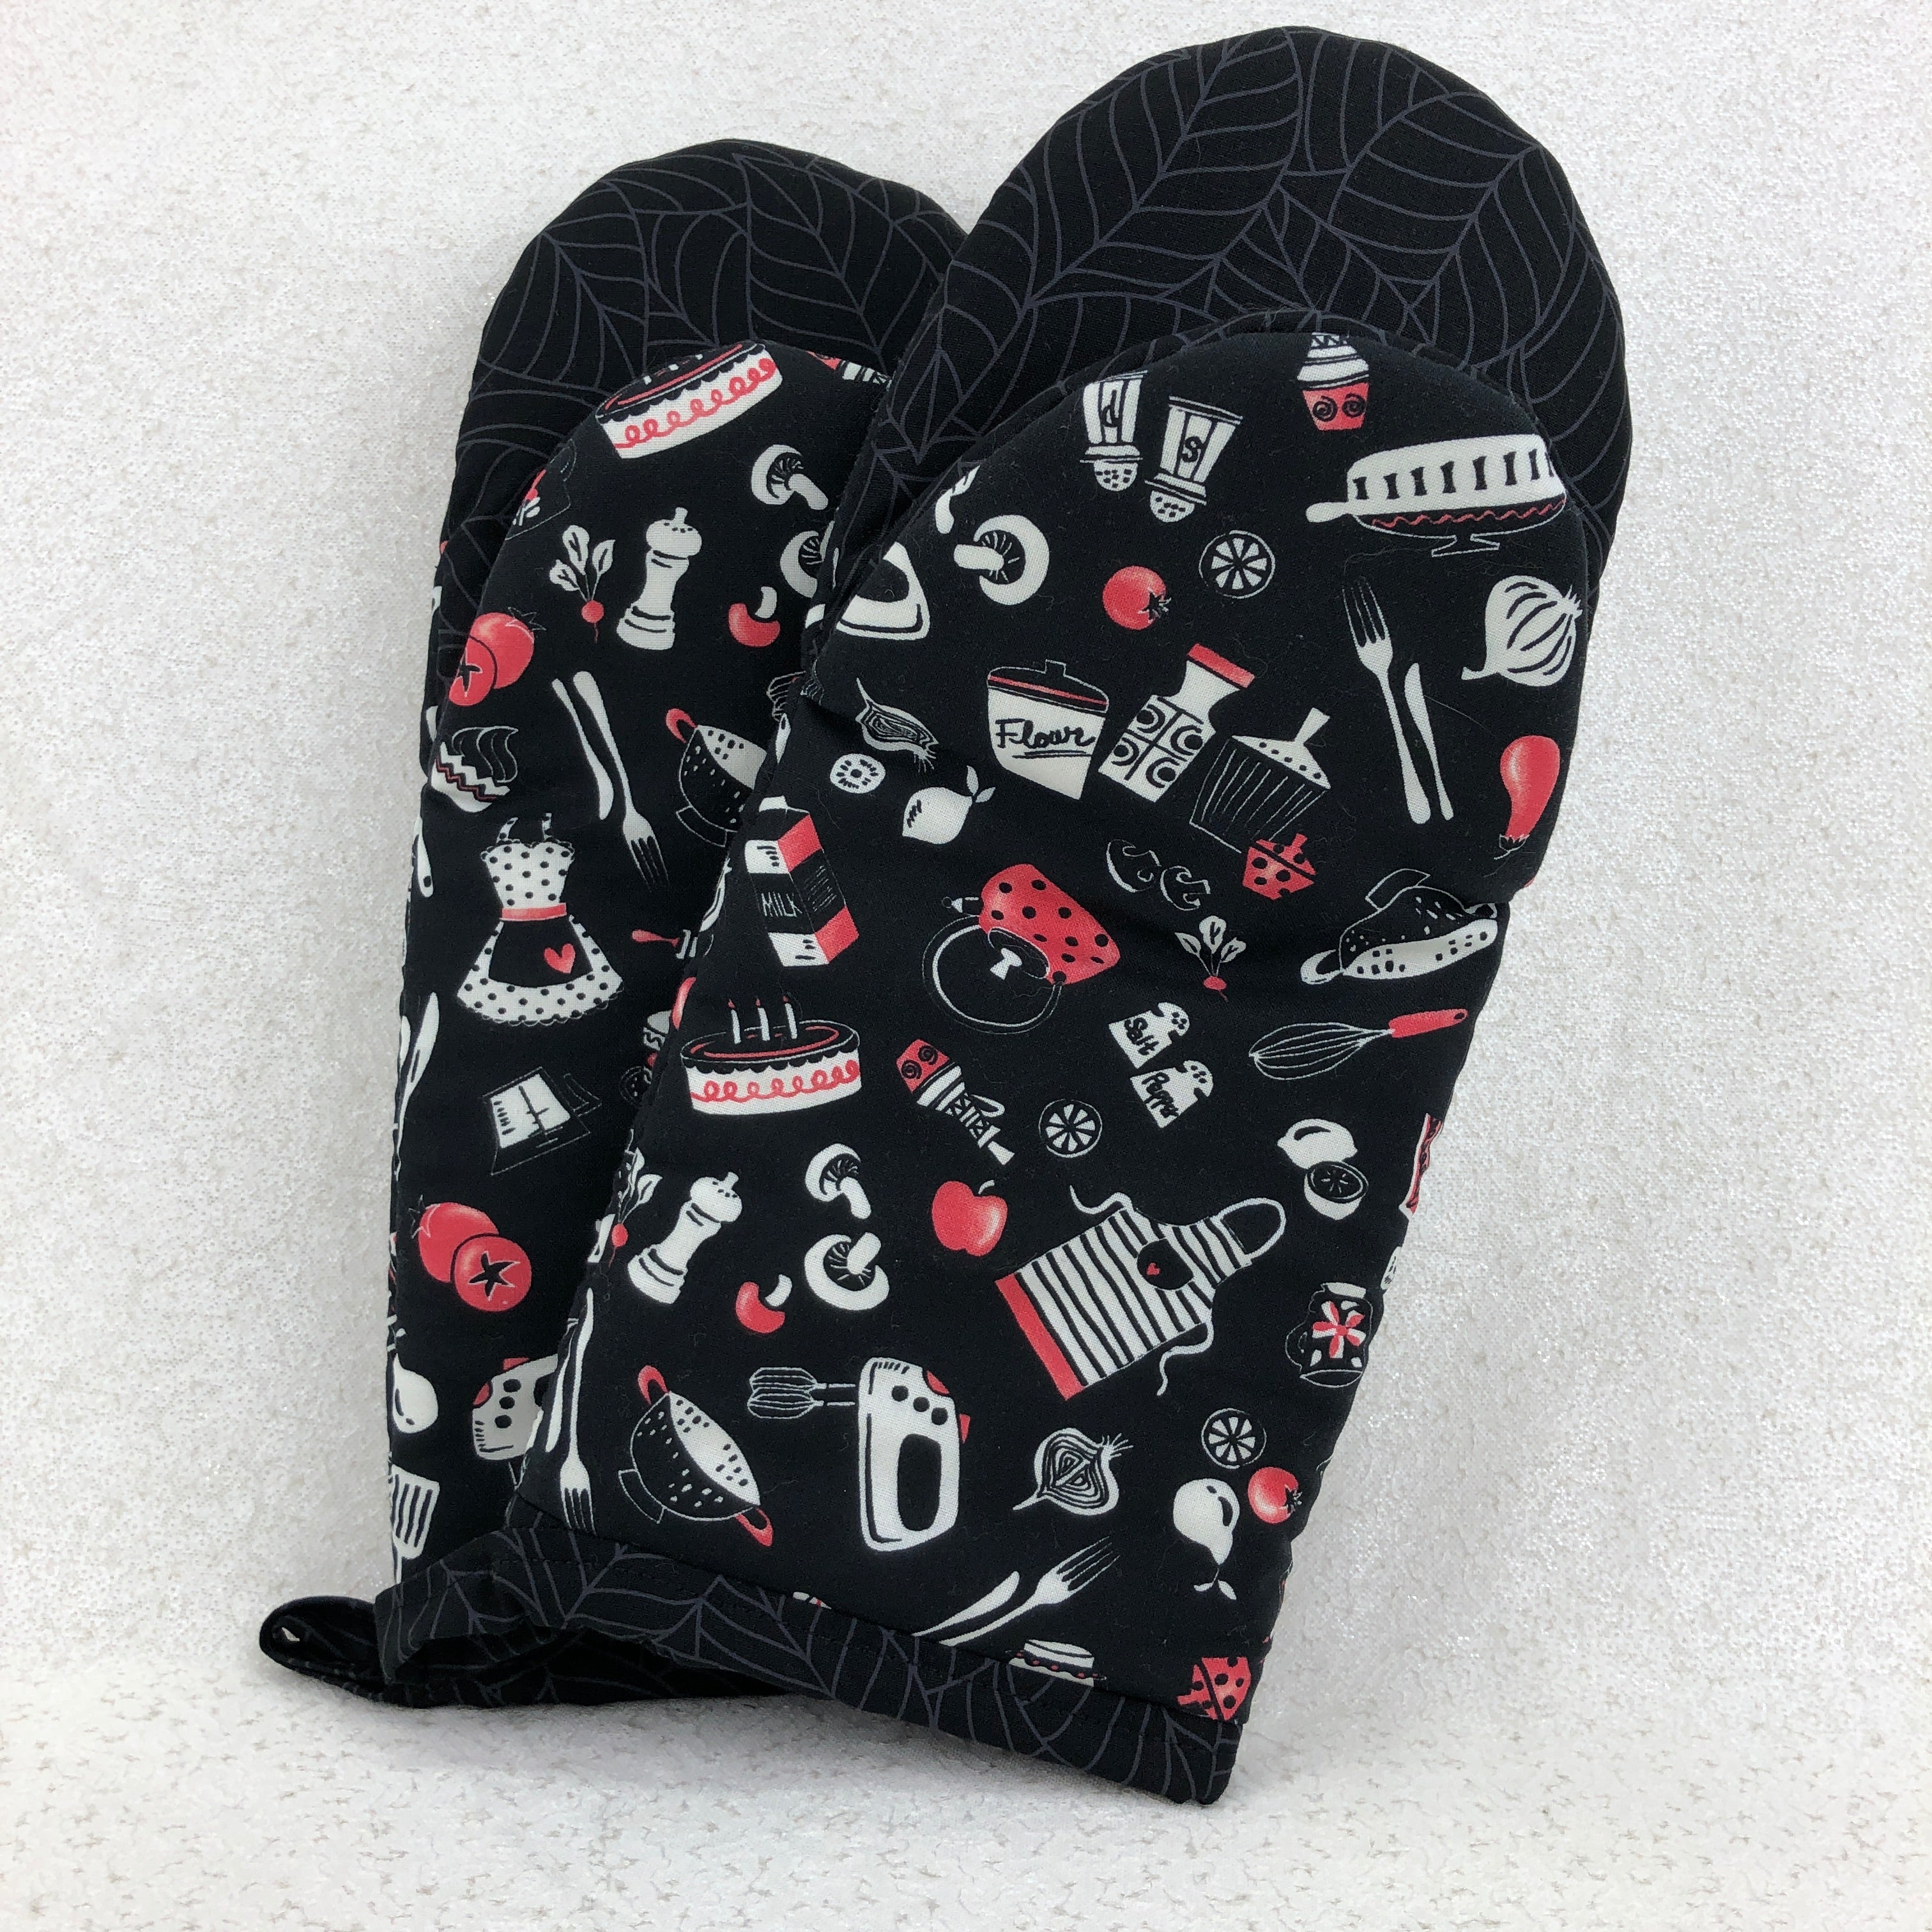 Oven Mitts: Classic Kitchen